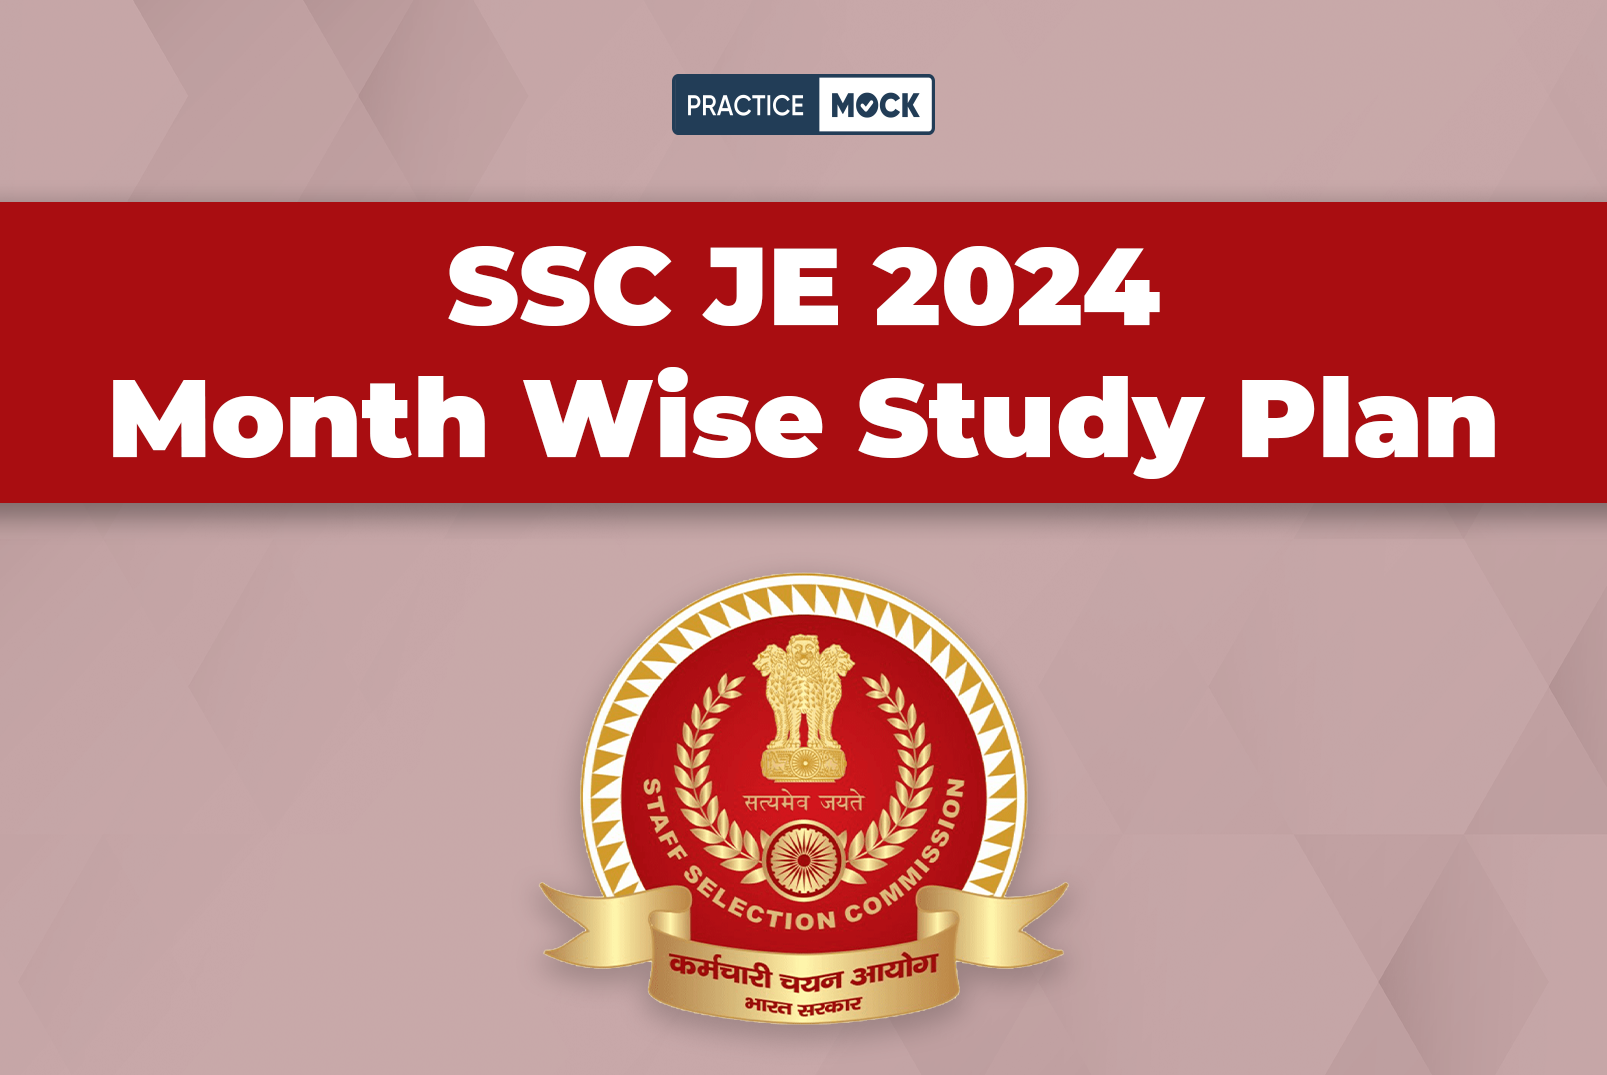 SSC JE 2024 Month Wise Study Plan (1)